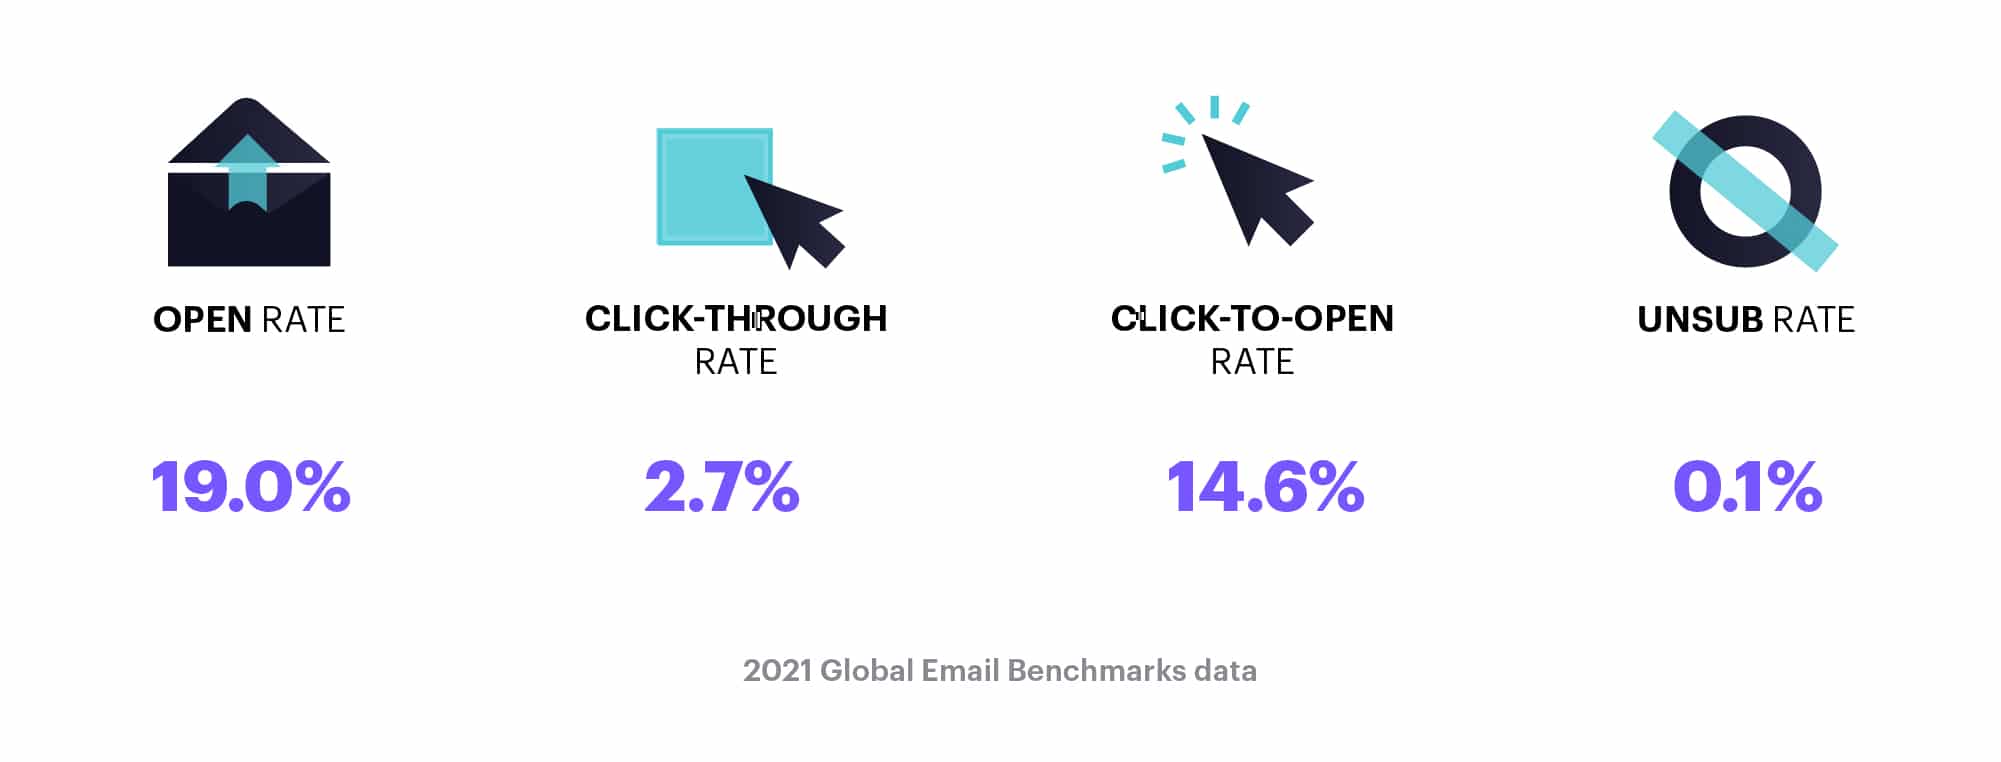 Email marketing benchmarks for Europe